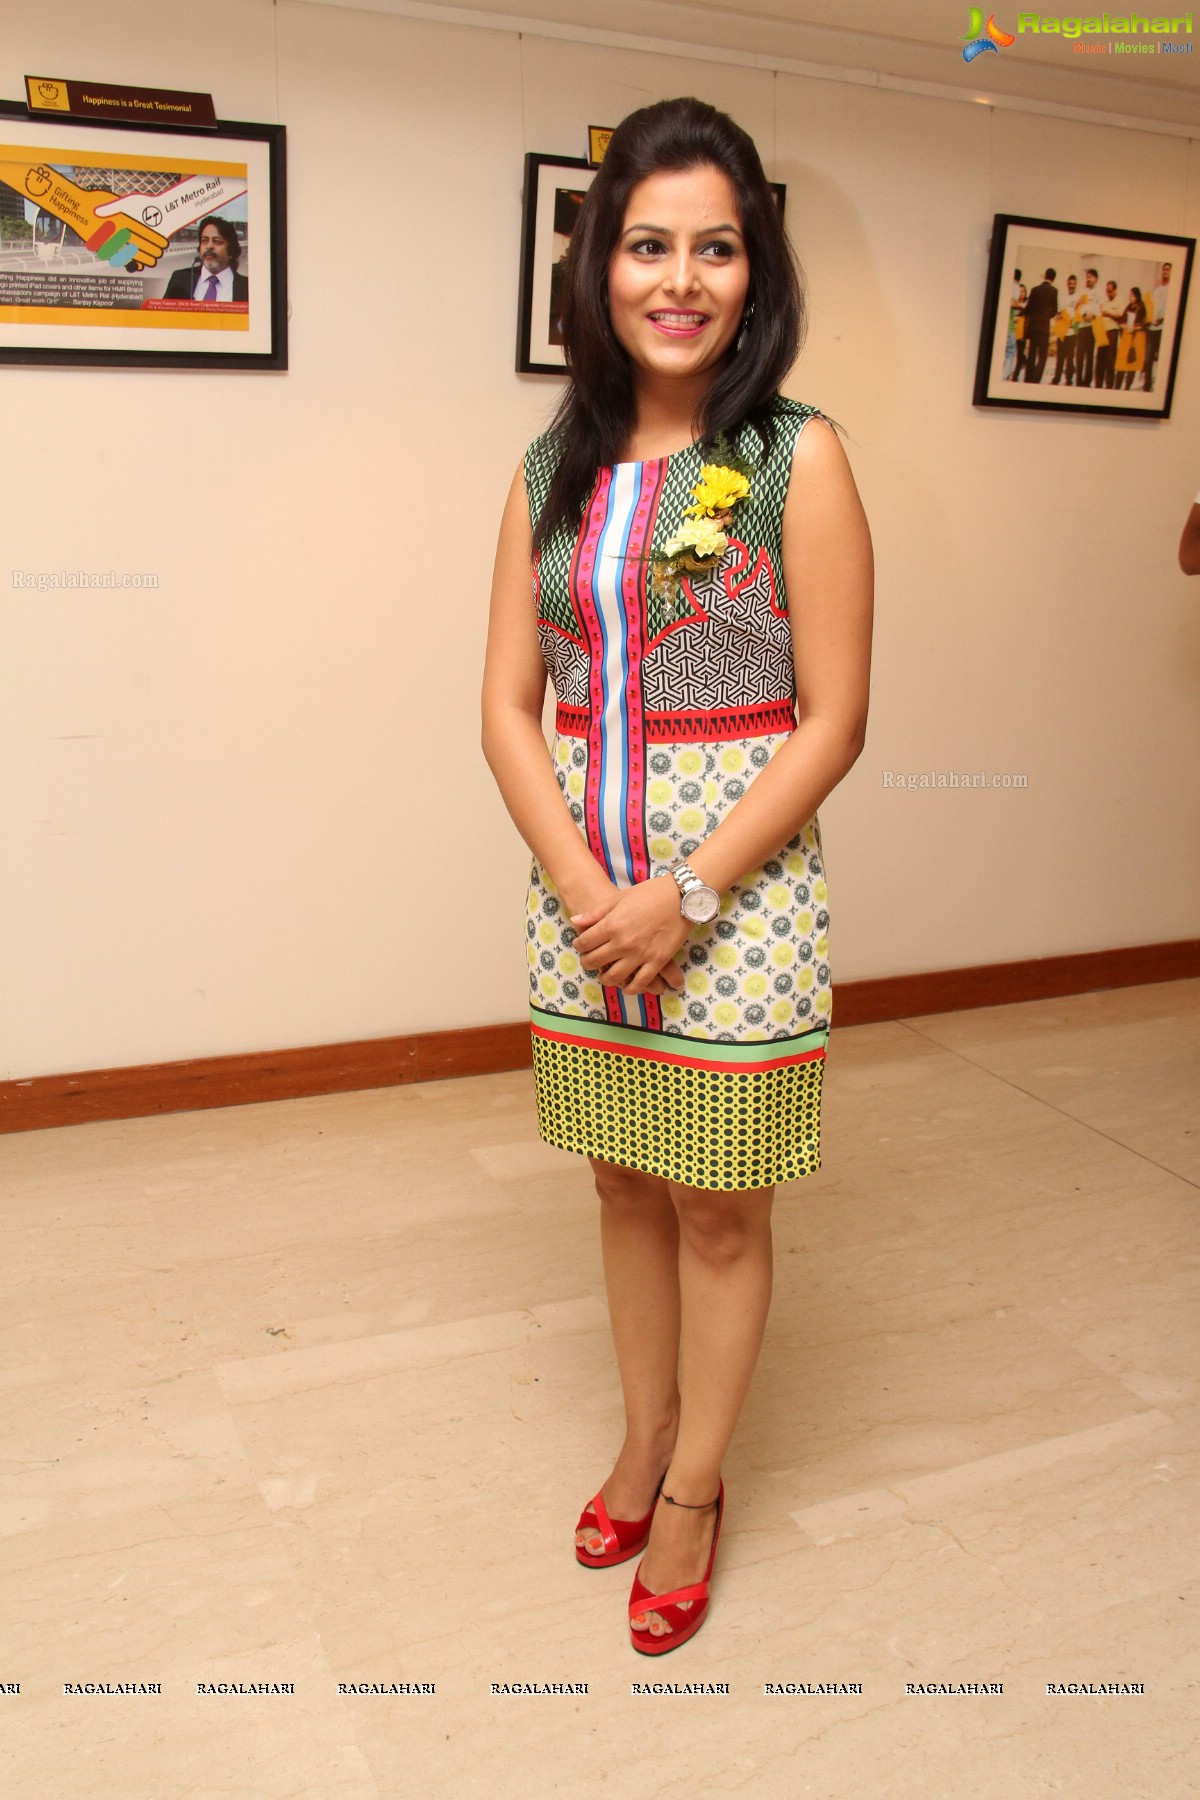 Colors of Happiness - A Photography Show at Muse Art Gallery, Hyderabad